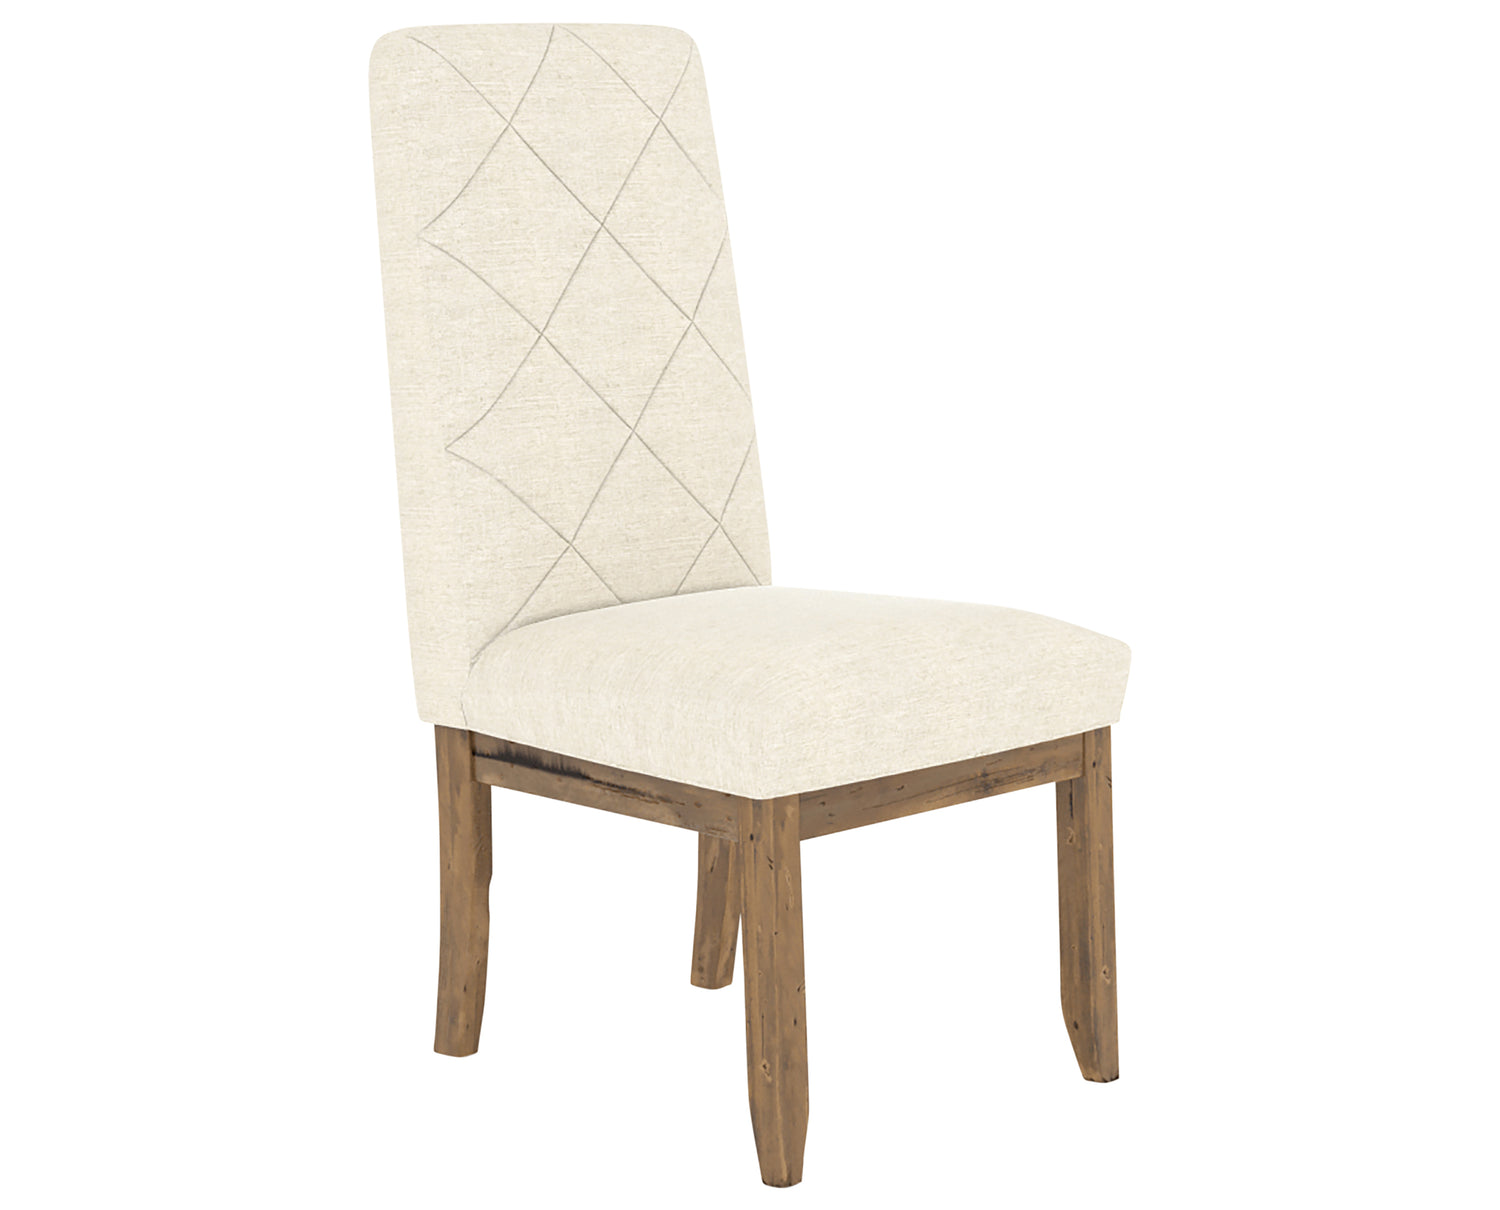 Oak Washed & Quilted Fabric TW | Canadel Champlain Dining Chair 0138 | Valley Ridge Furniture